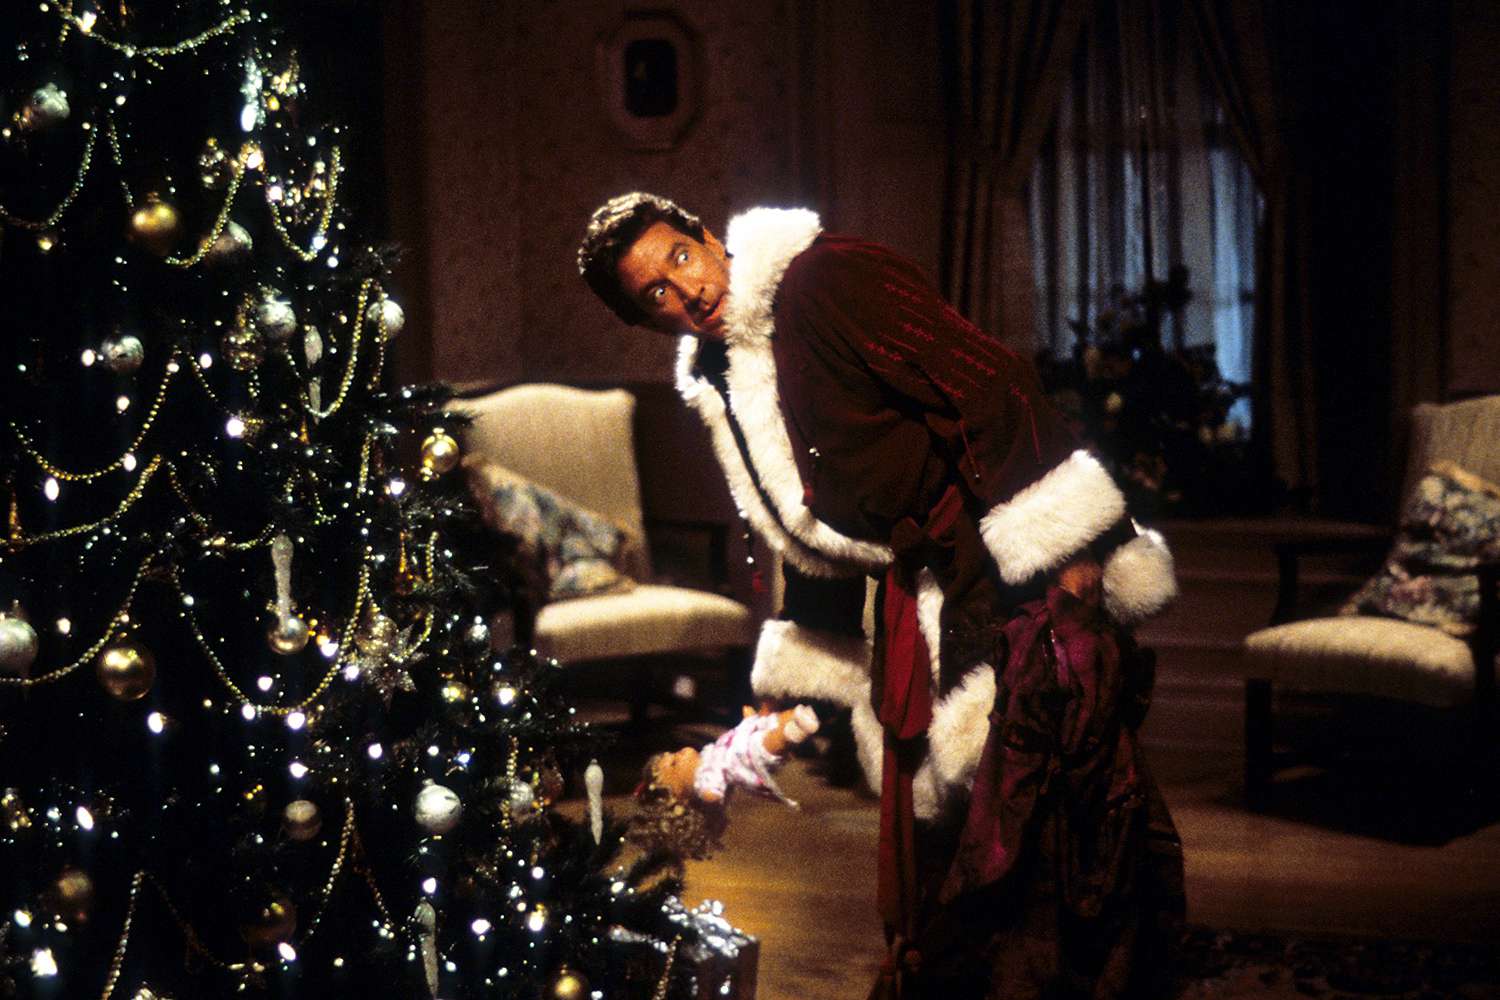 Tim Allen with a doll in his hand, standing next to a Christmas tree in a scene from the film 'The Santa Clause', 1994.